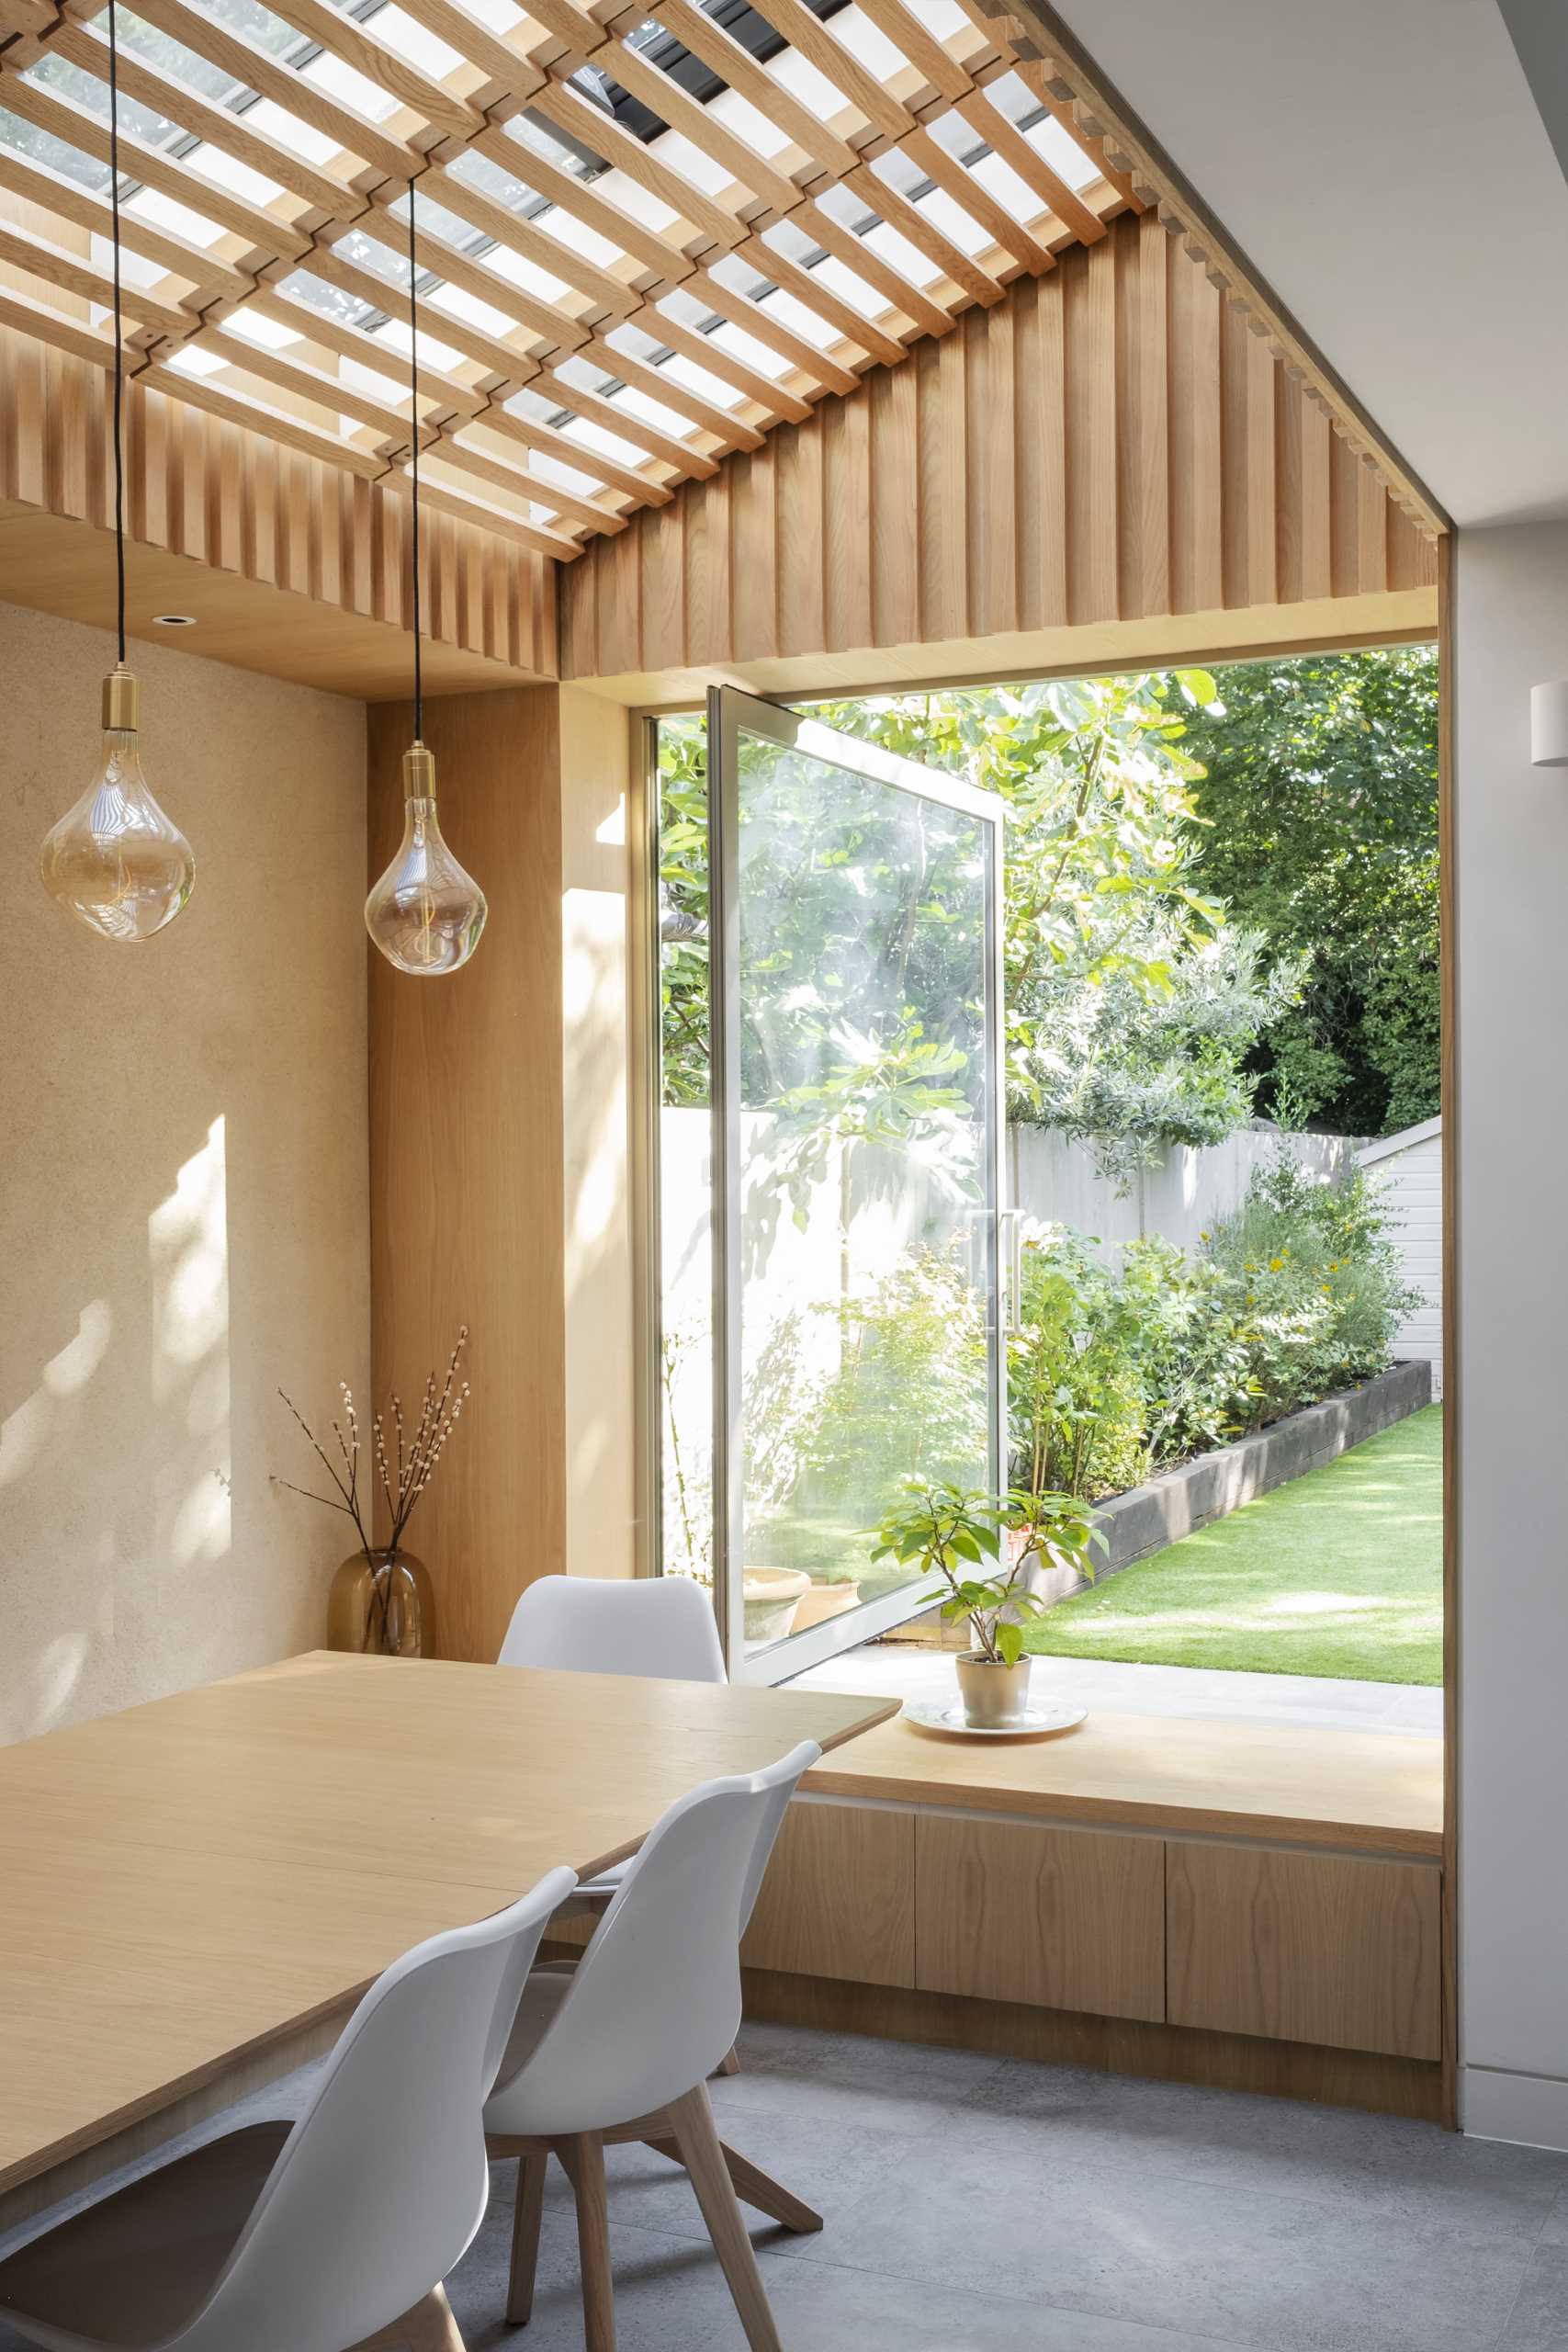 A large pivoting window connects a dining room to the garden.